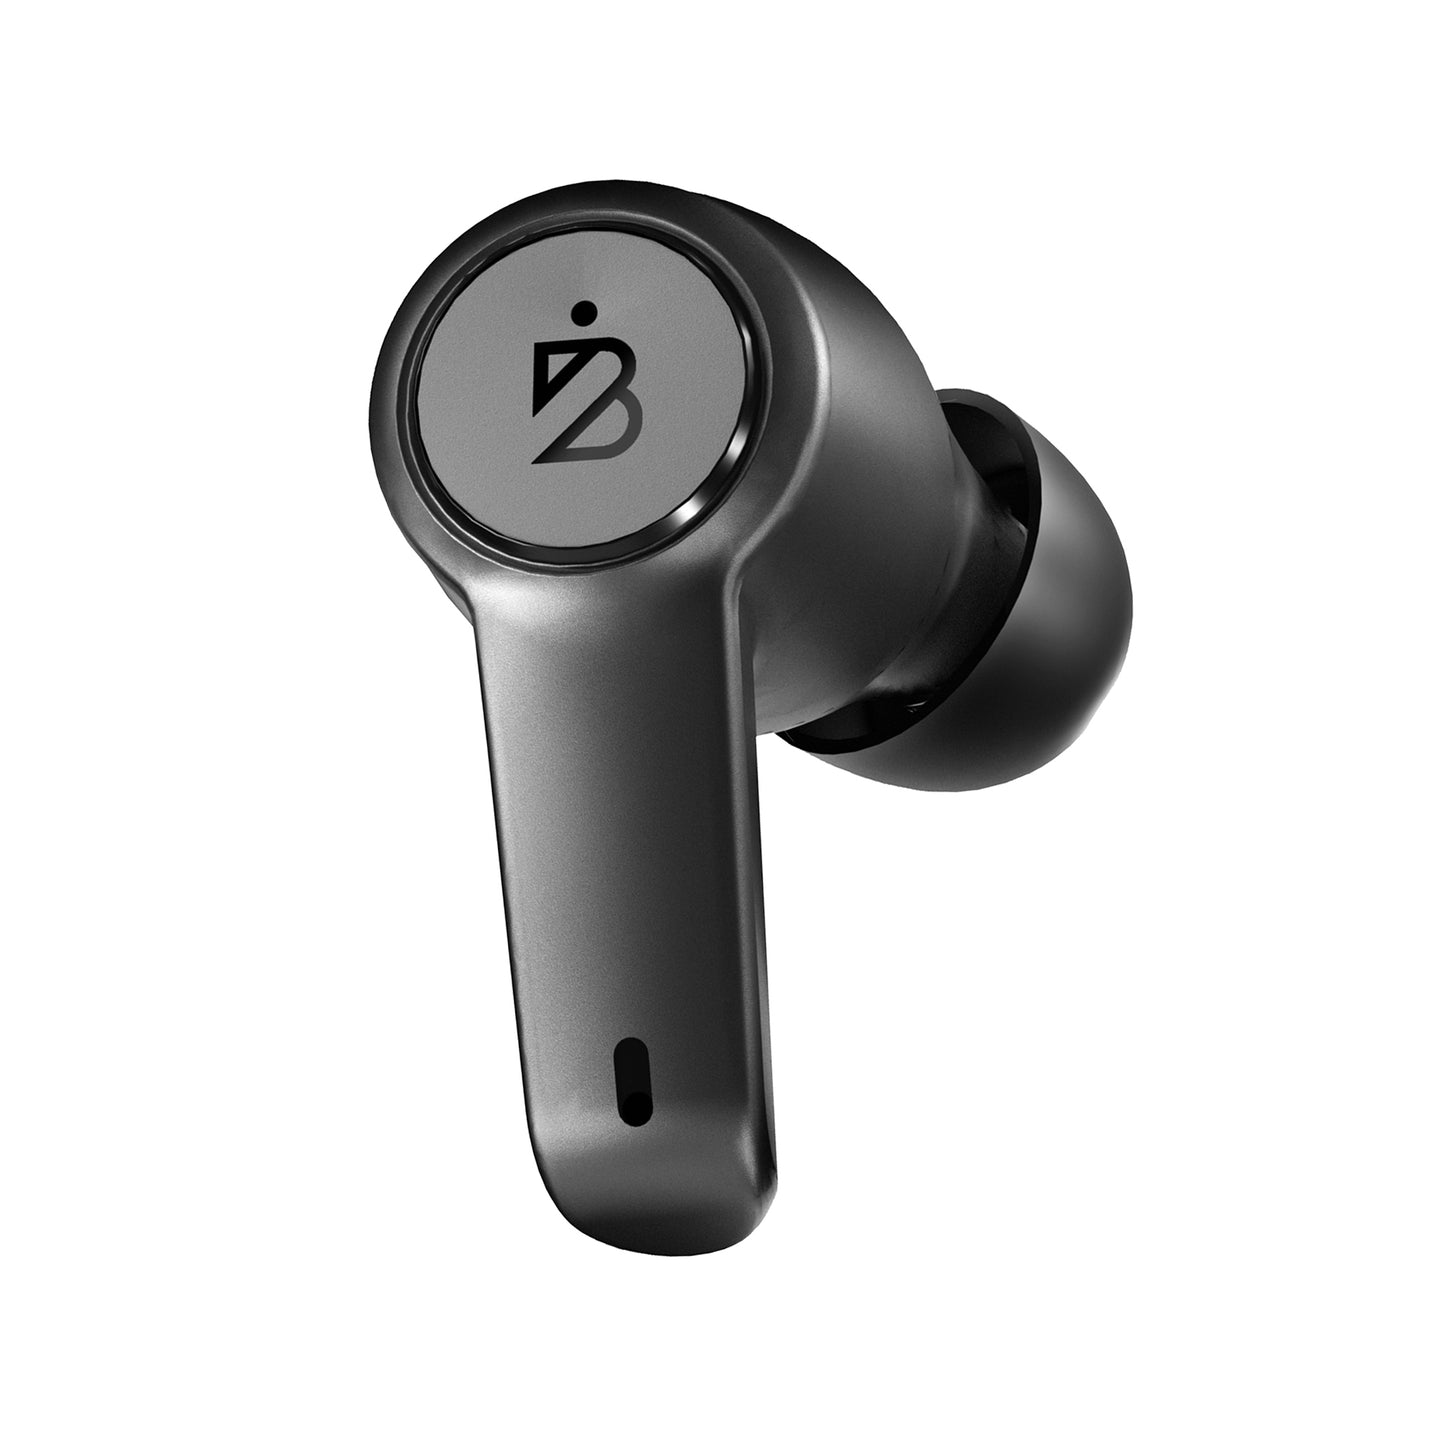 FirstClass 70 Replacement Right Earbud - Black